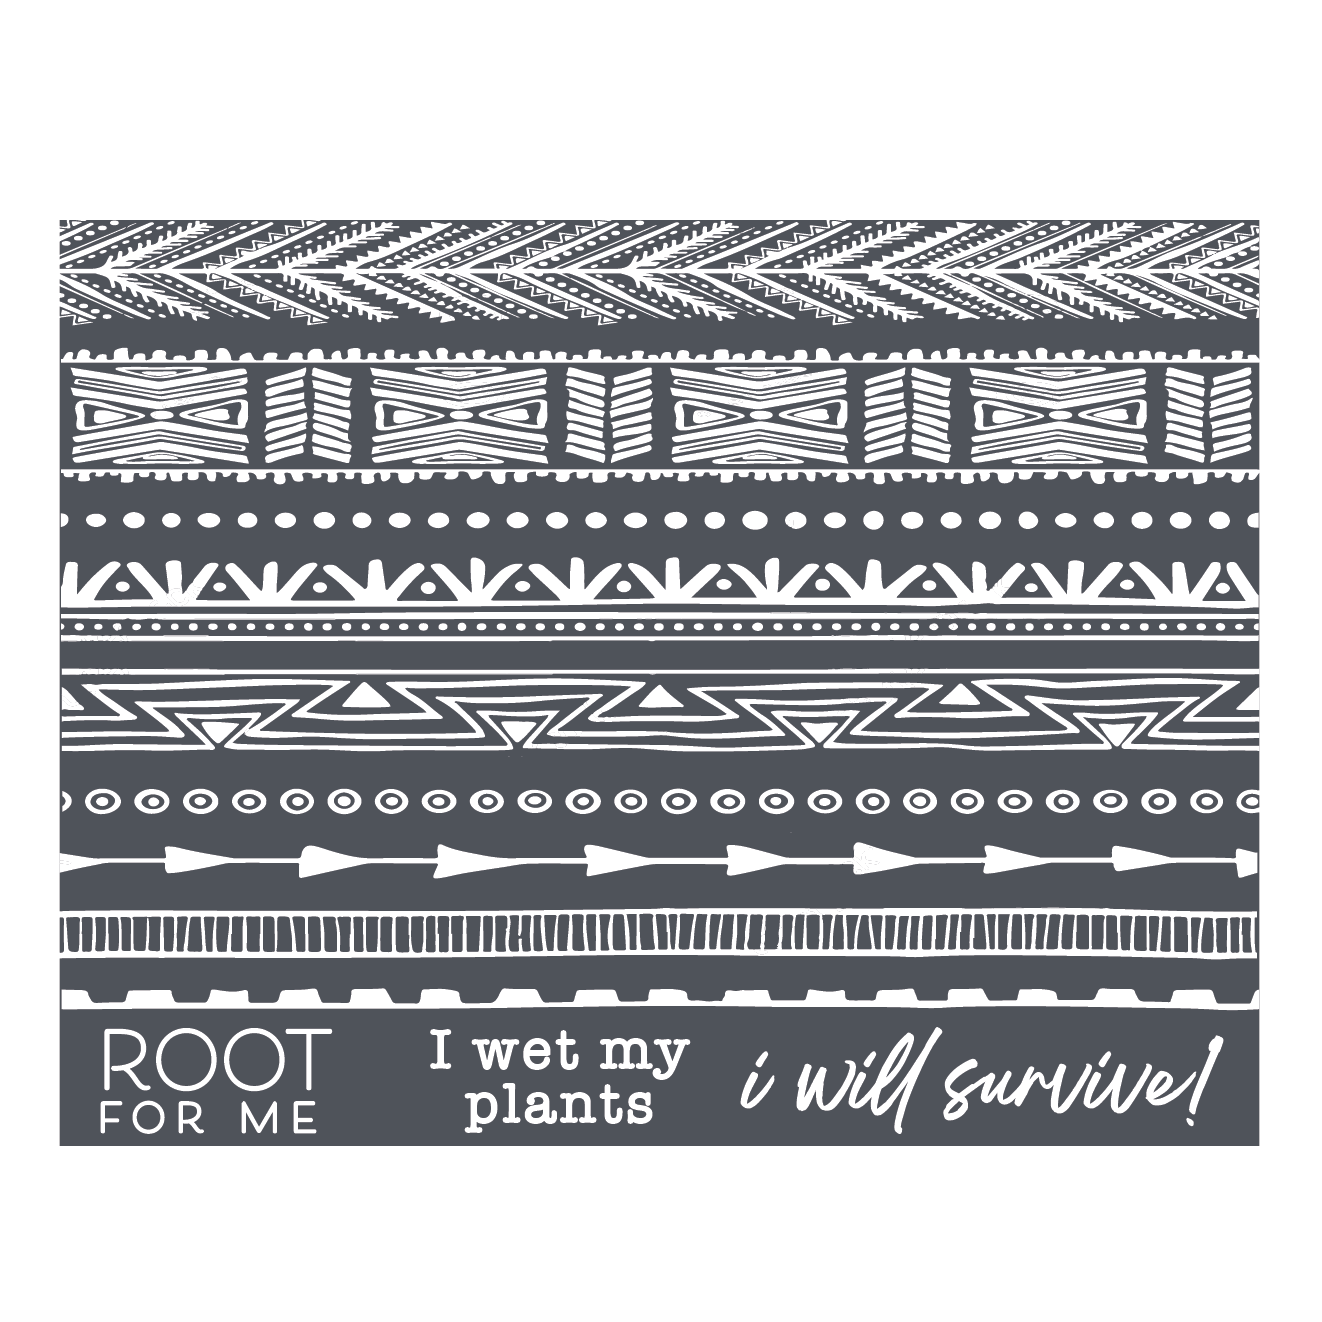 Root for Me - Mesh Stencil 8.5x11